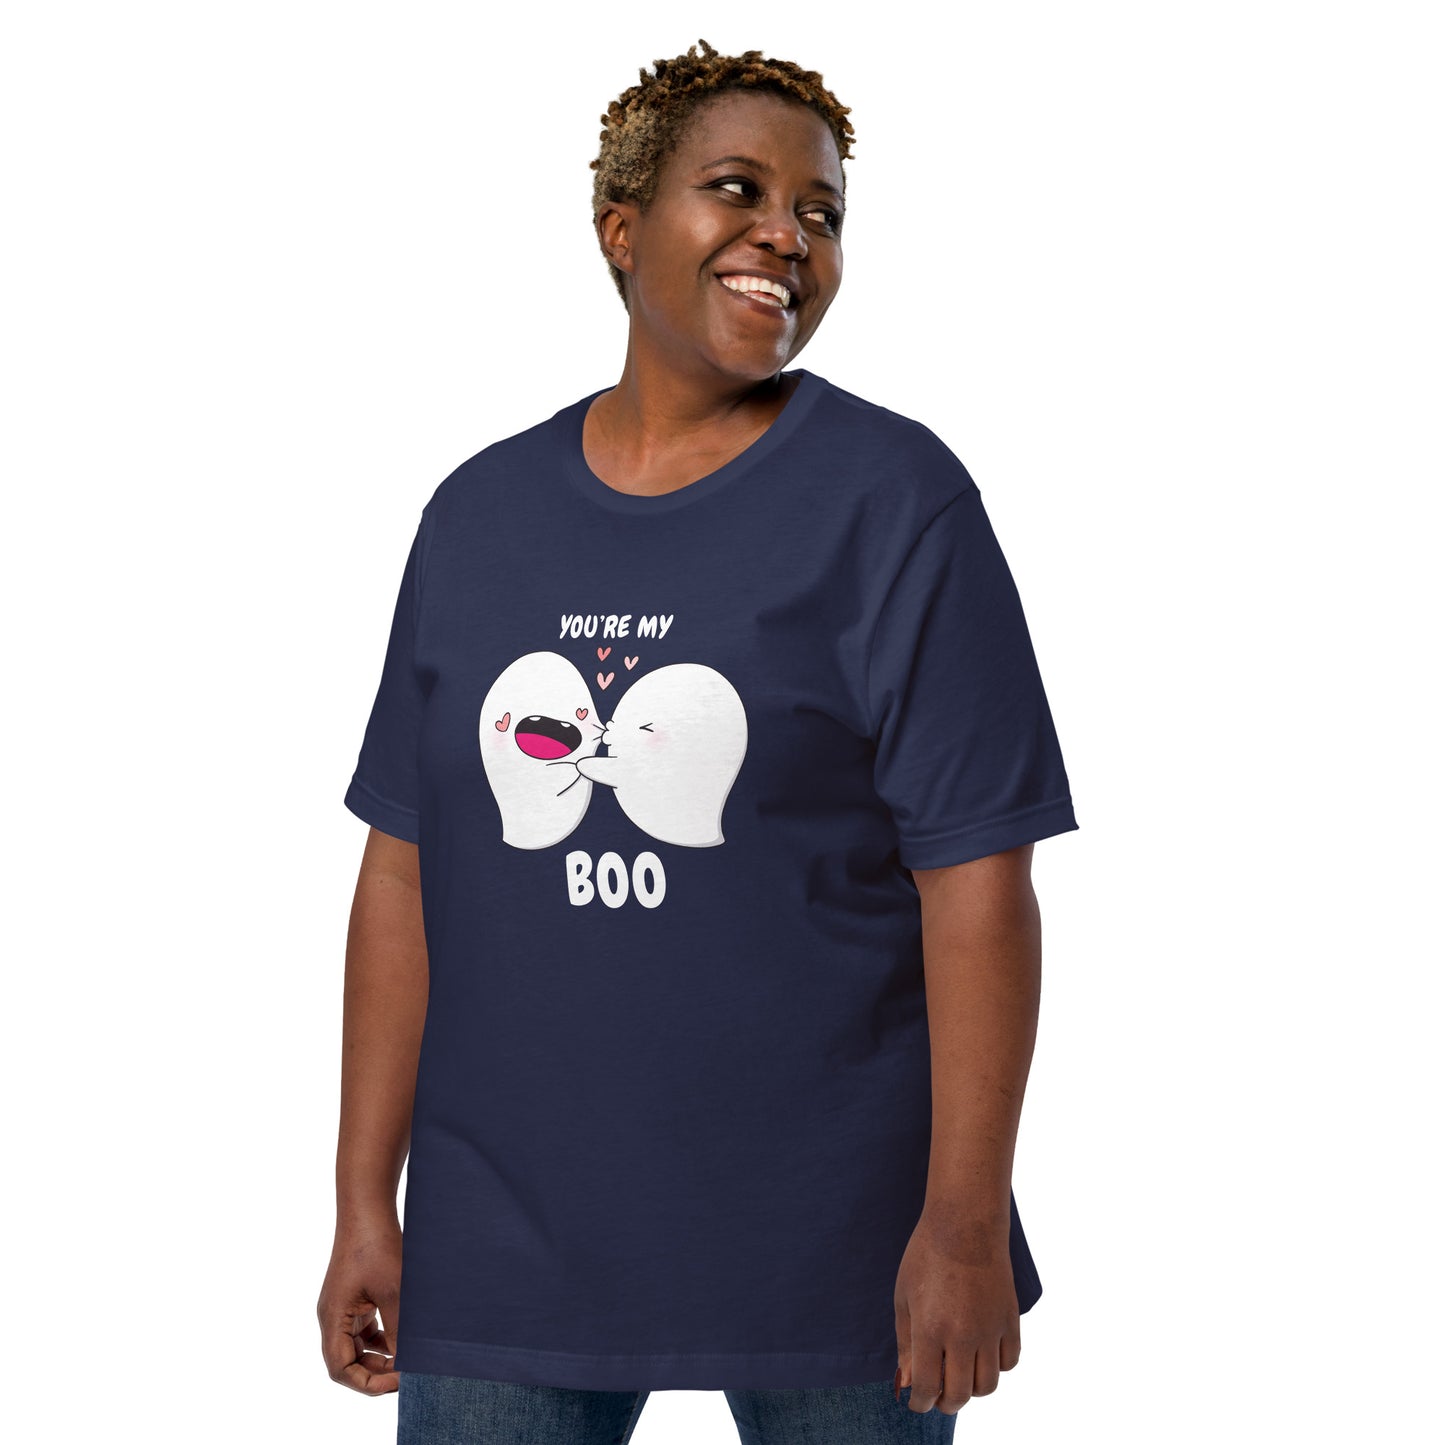 You're my boo - Unisex t-shirt